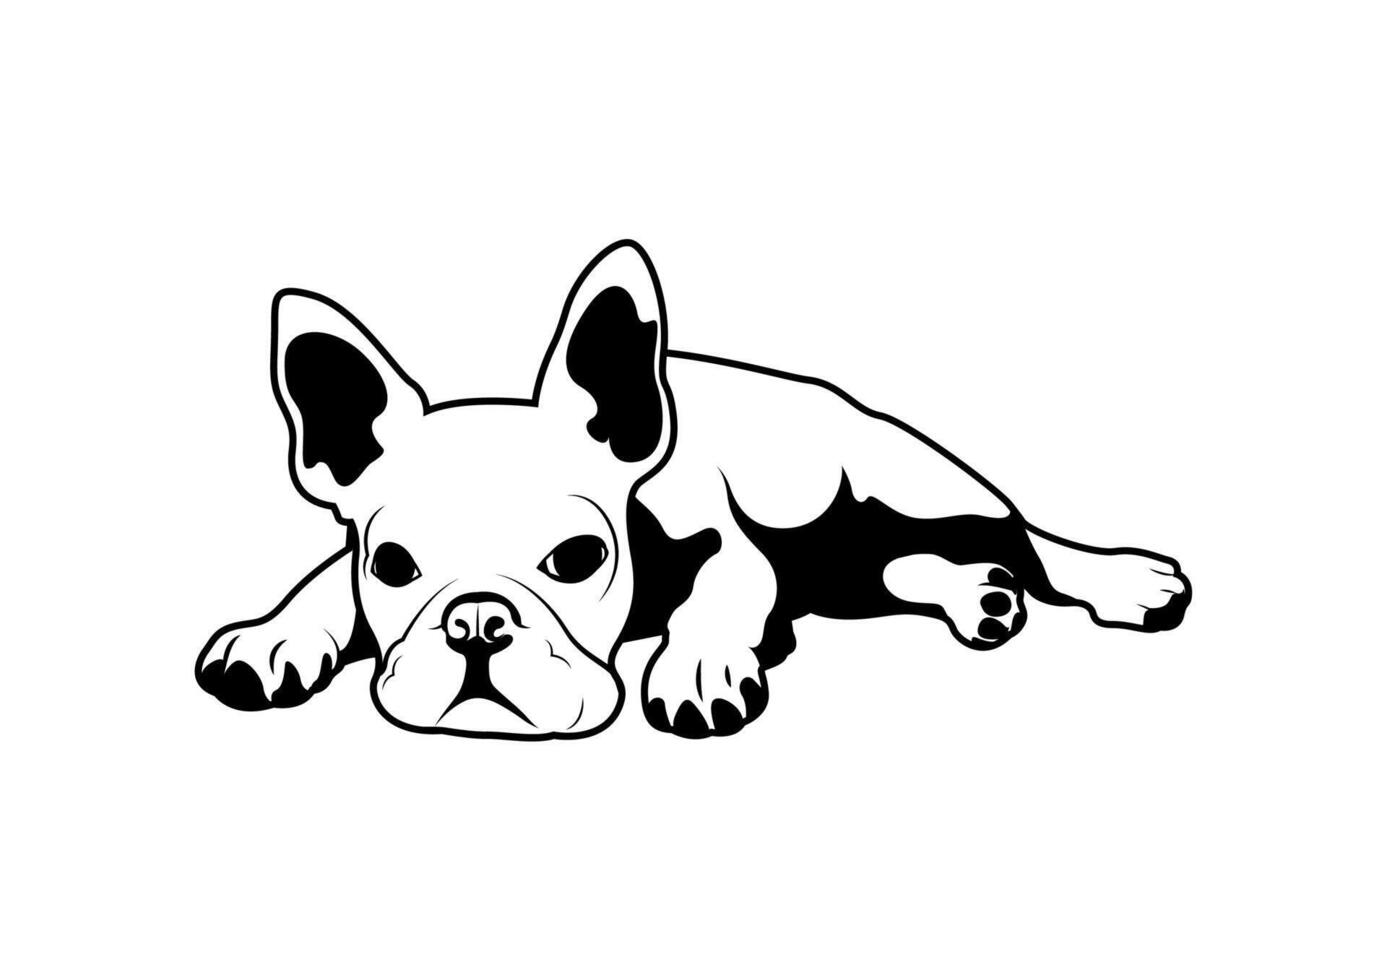 Cute French Bulldog lay down on the floor in black and white concept vector